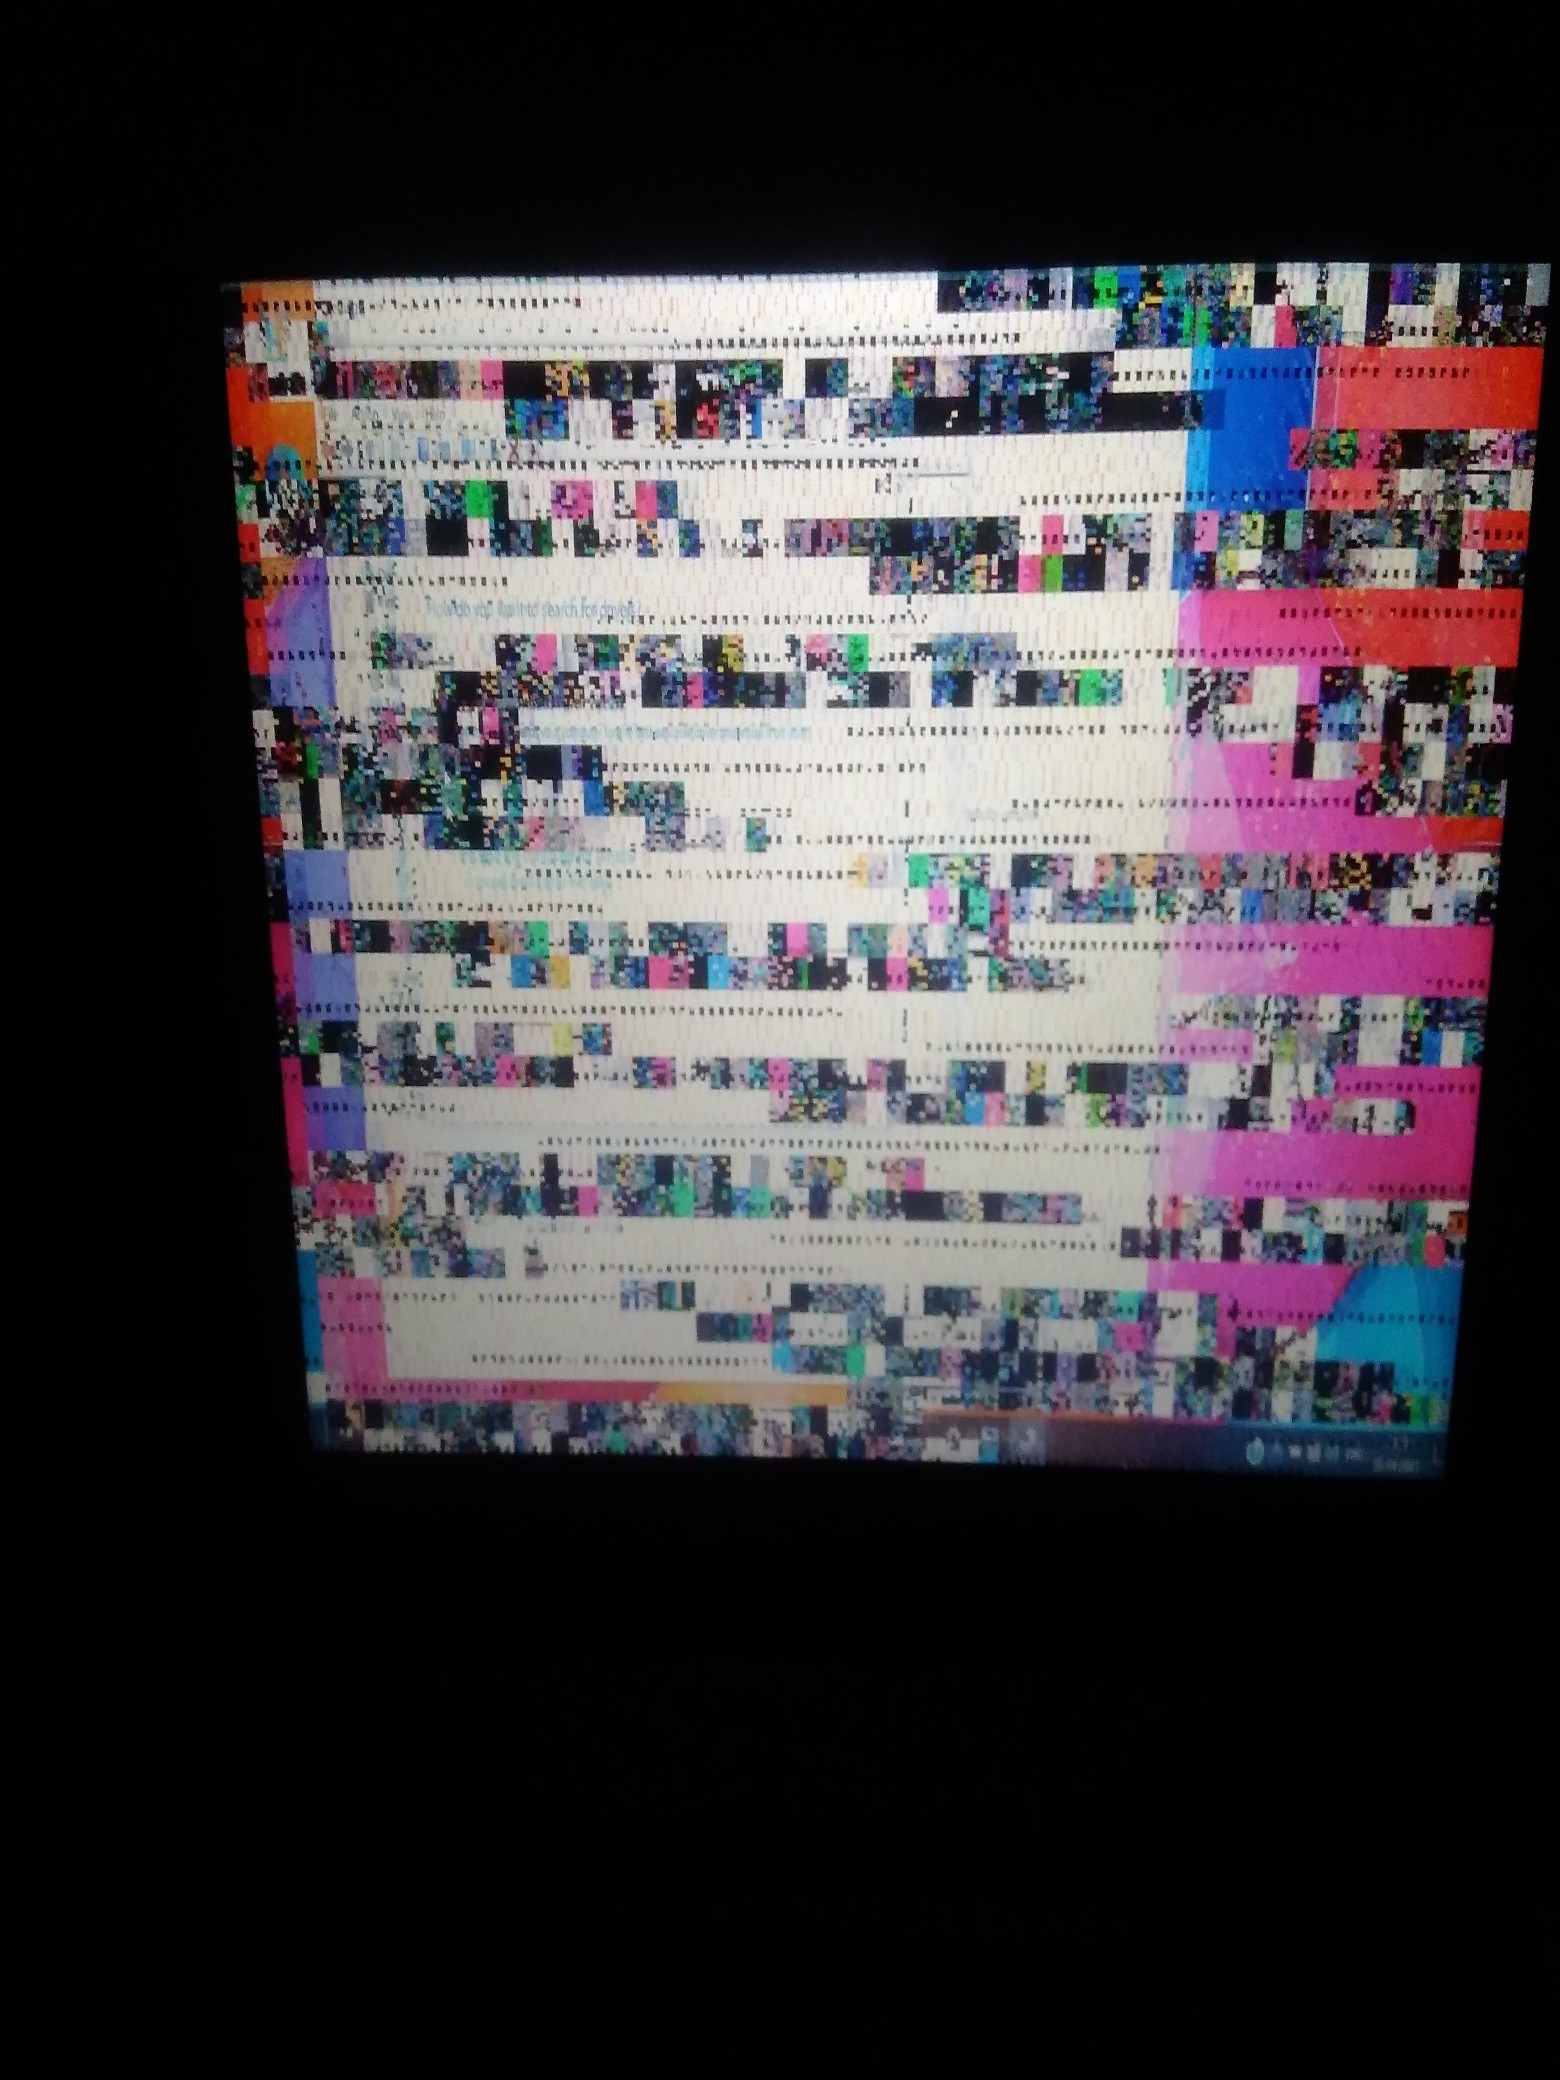 My laptop's screen glitches and freezes randomly - HP Support Community -  8053206